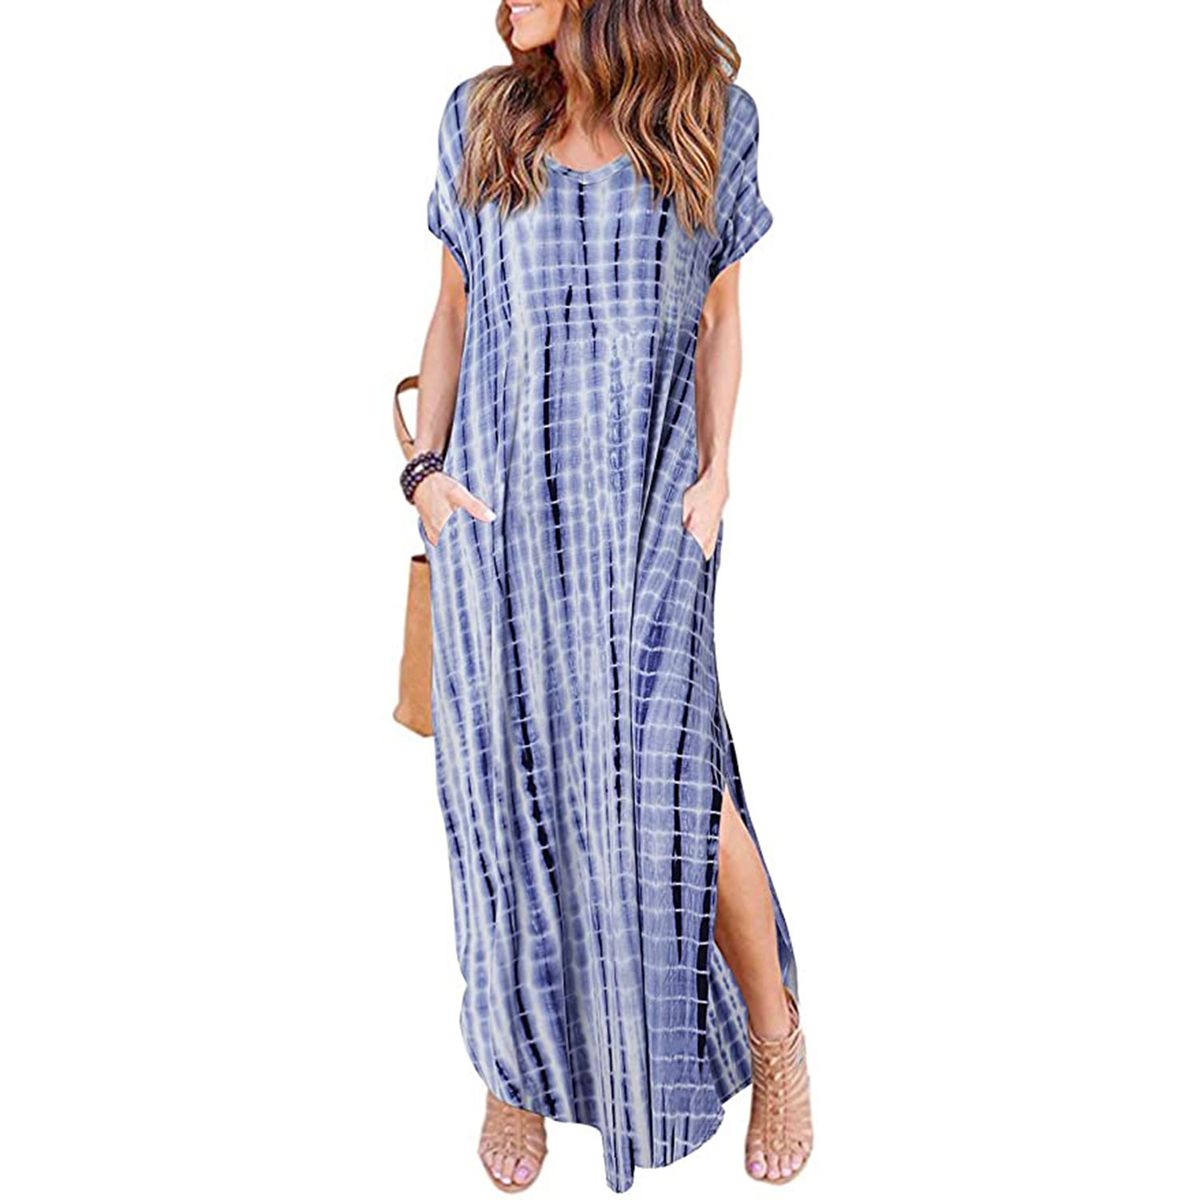 12 Best Maxi Dresses on Amazon to Wear This Spring | Southern Living